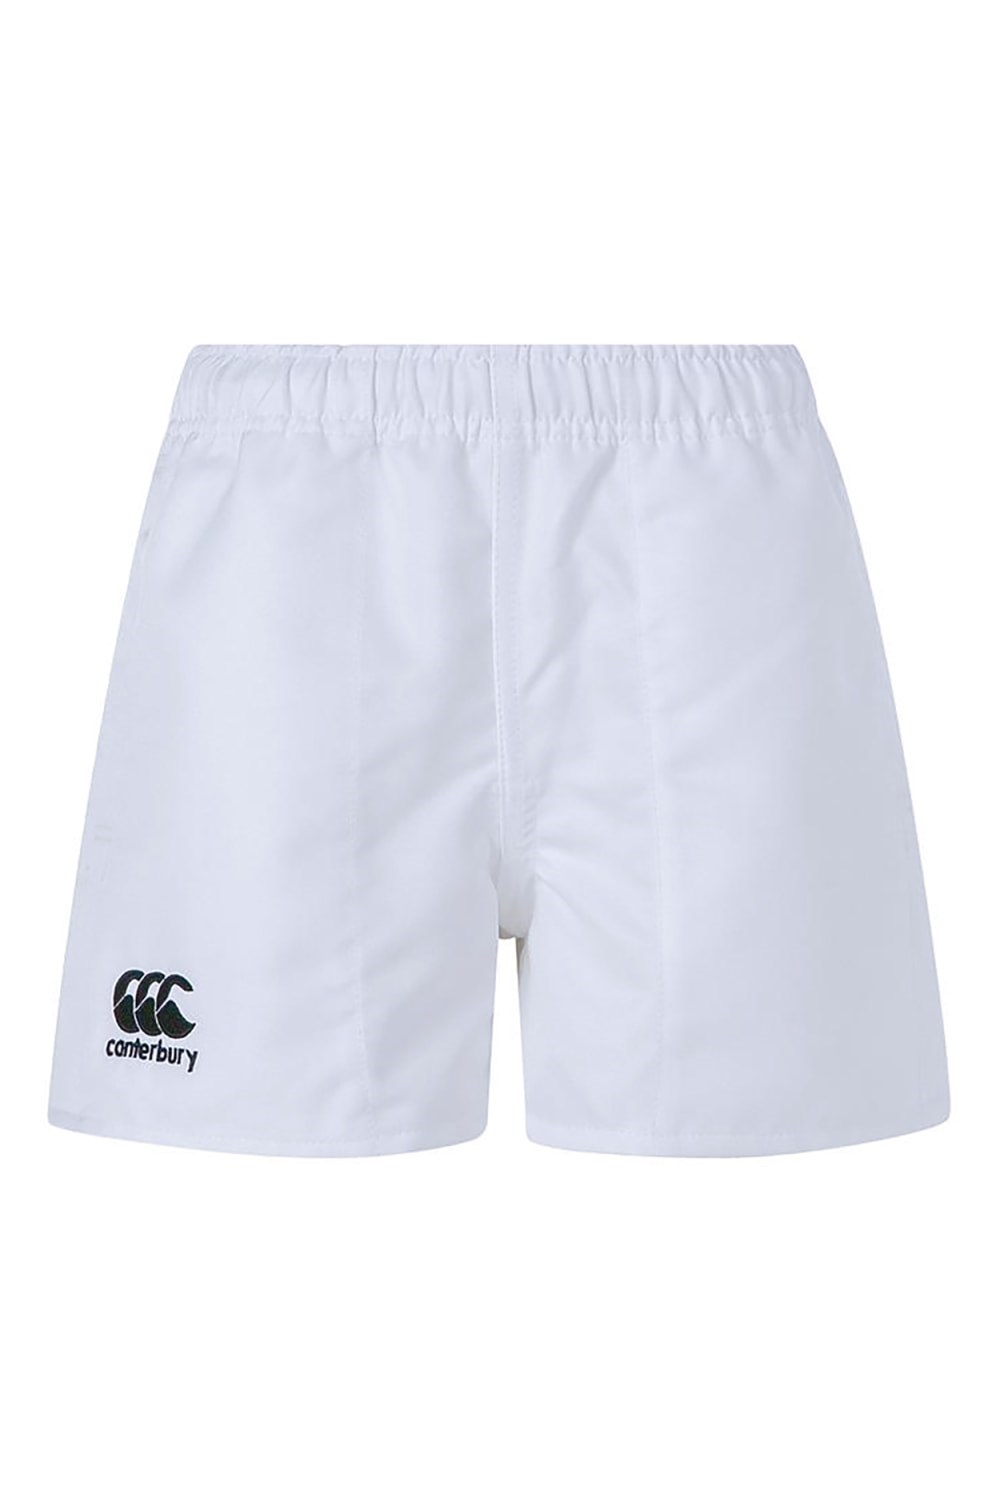 Kids Polyester Rugby Shorts -